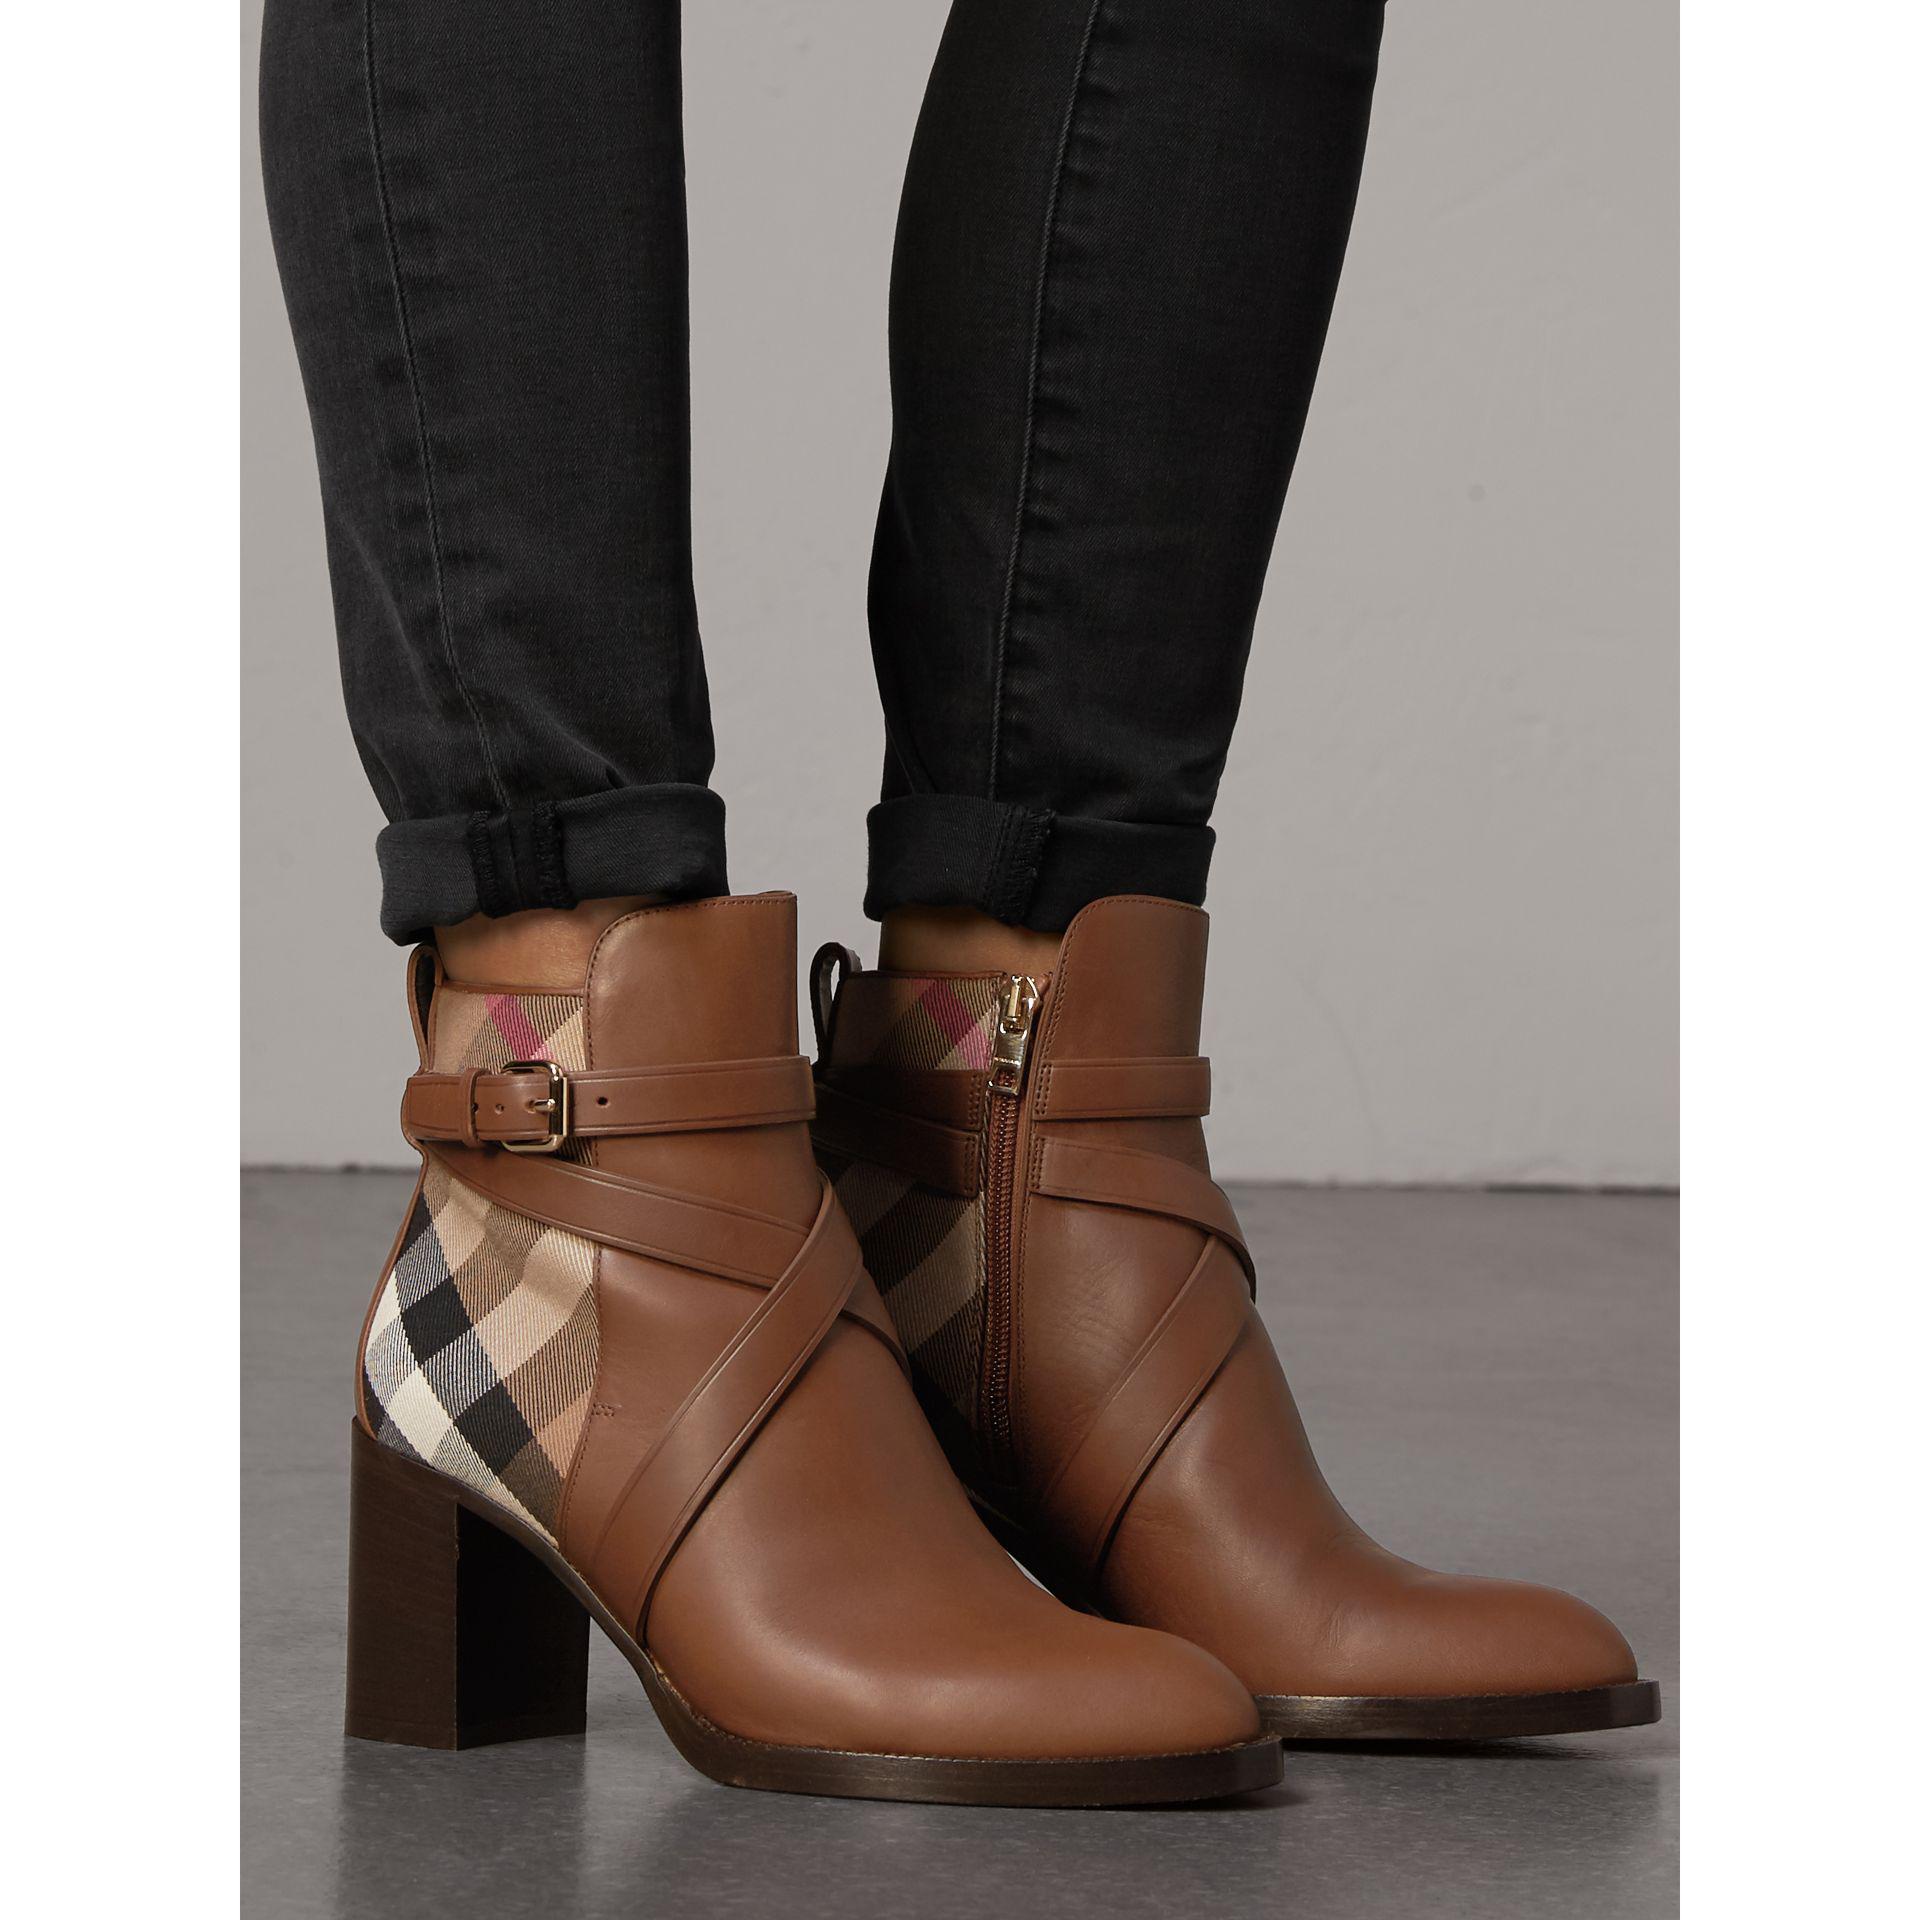 Introducir 53+ imagen burberry brown leather boots - Abzlocal.mx